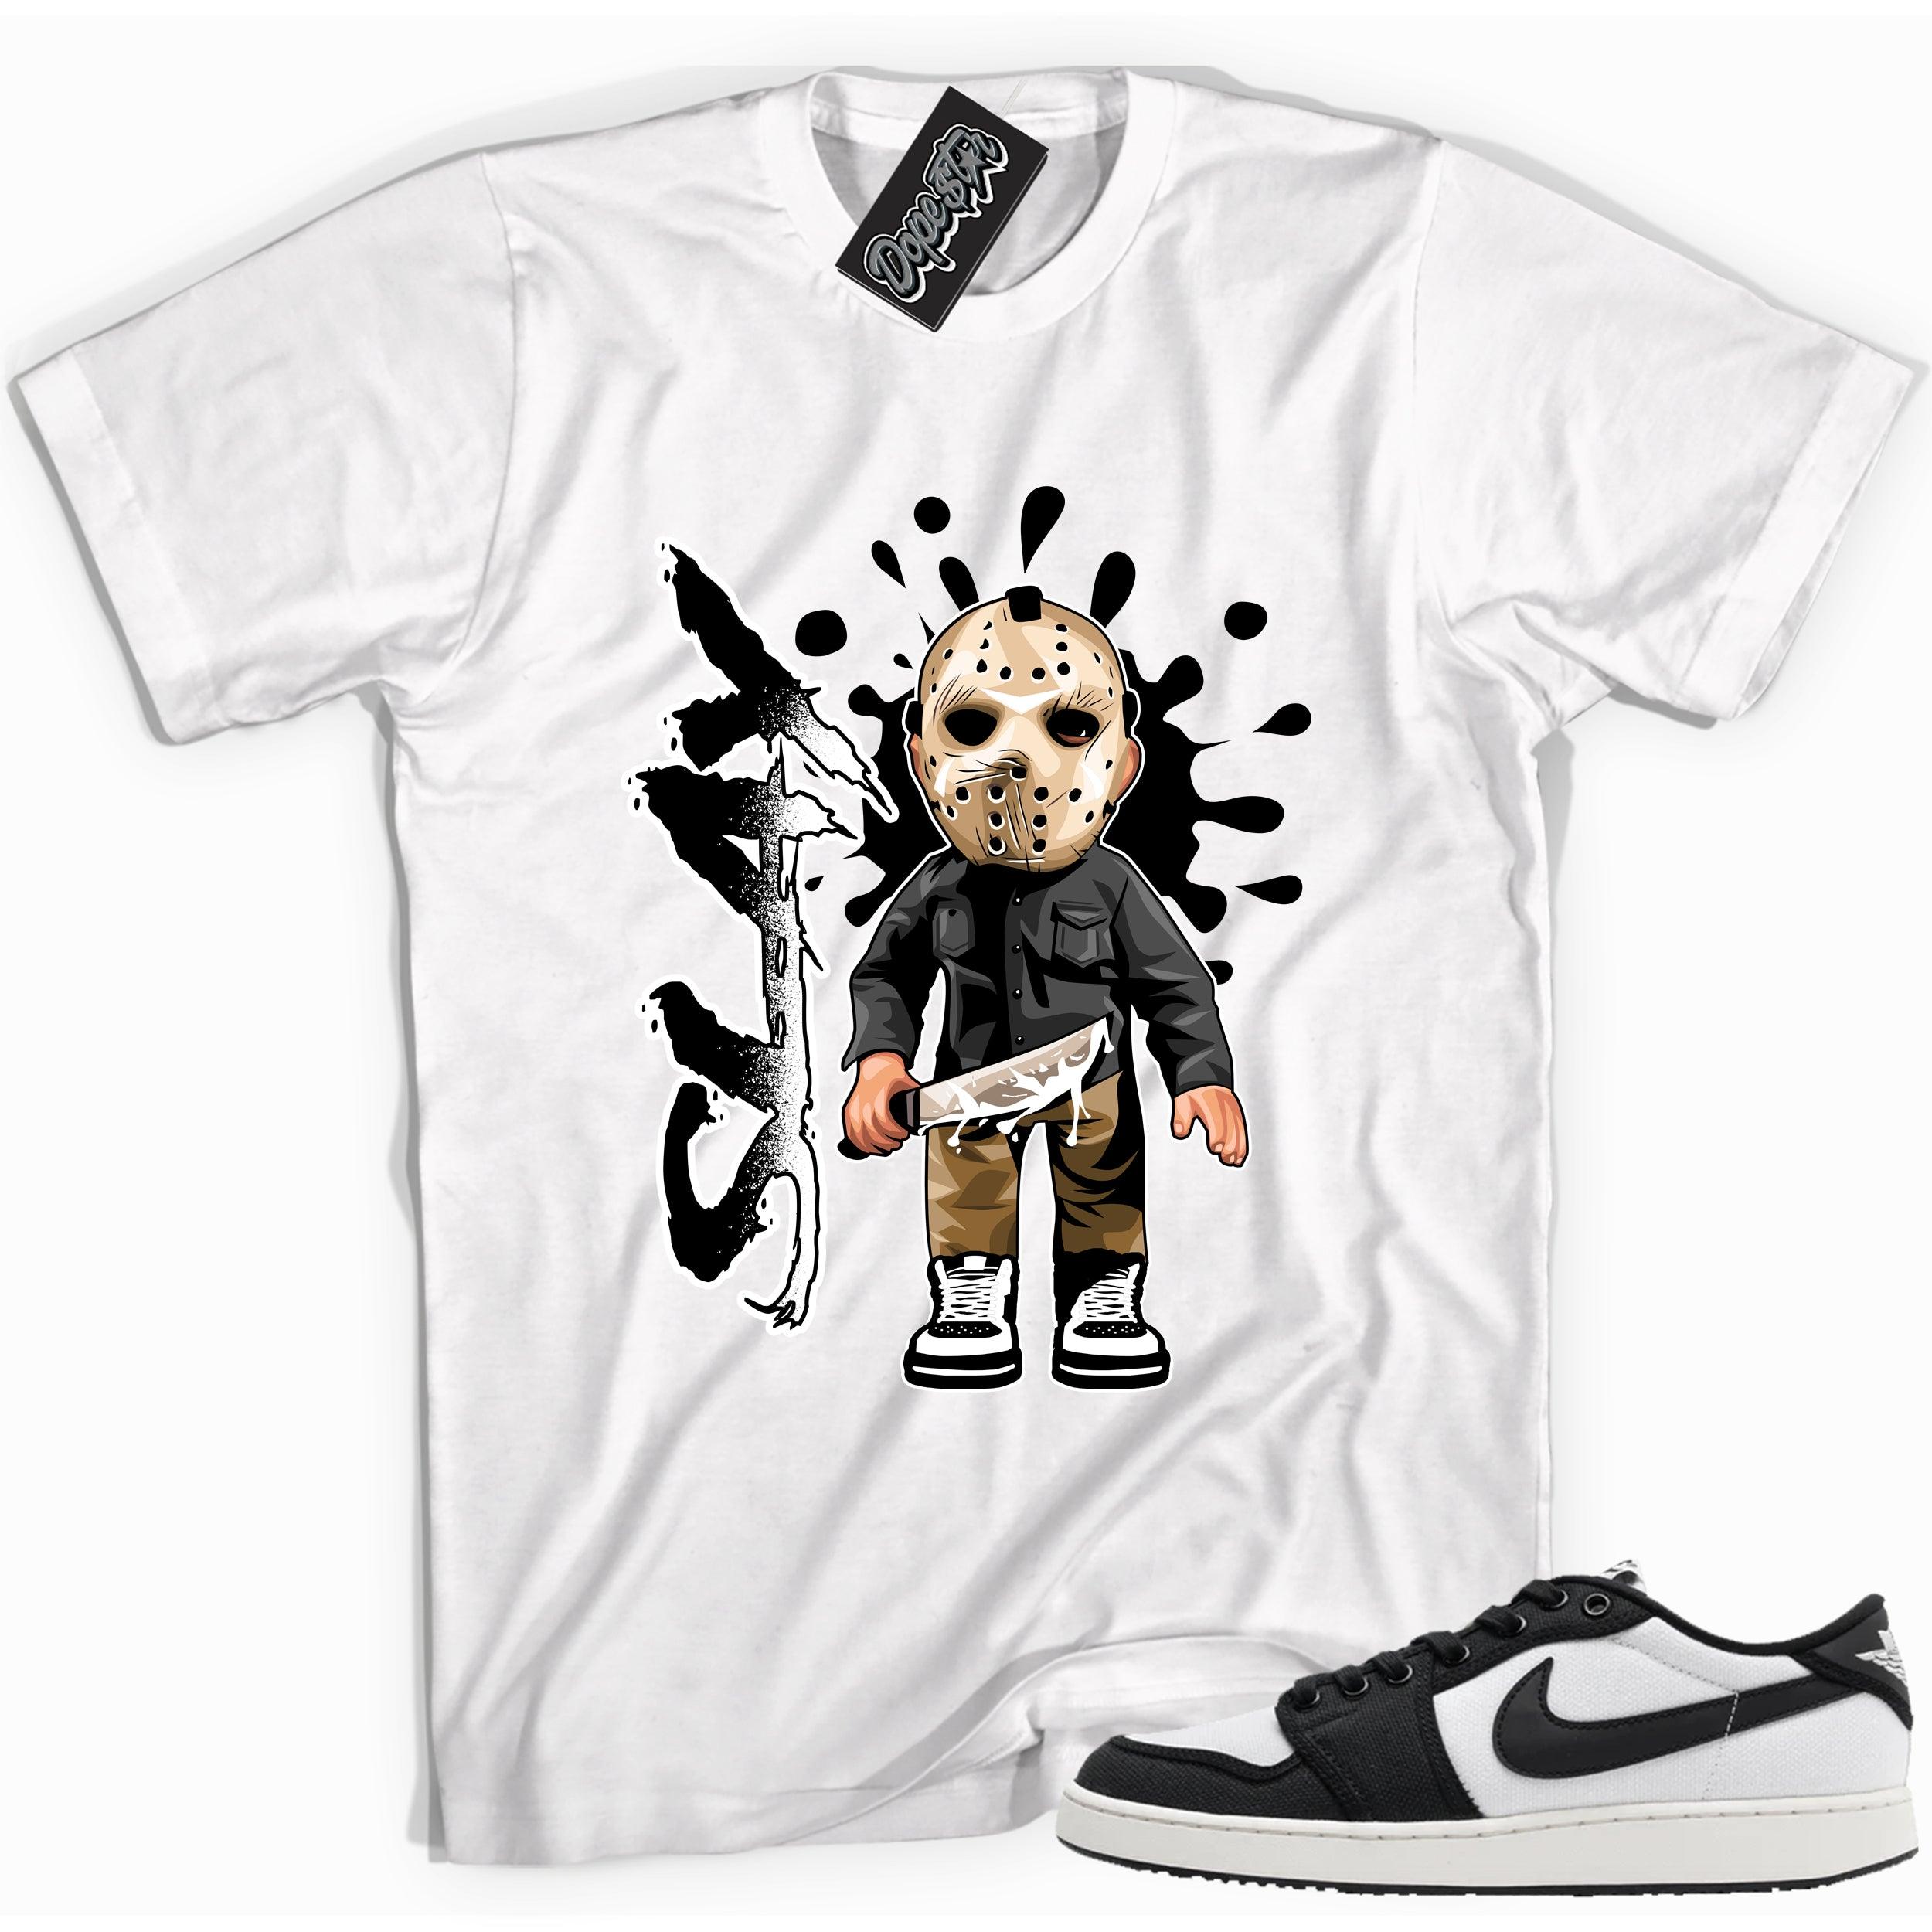 Cool white graphic tee with 'slay' print, that perfectly matches Air Jordan 1 Retro Ajko Low Black & White sneakers.